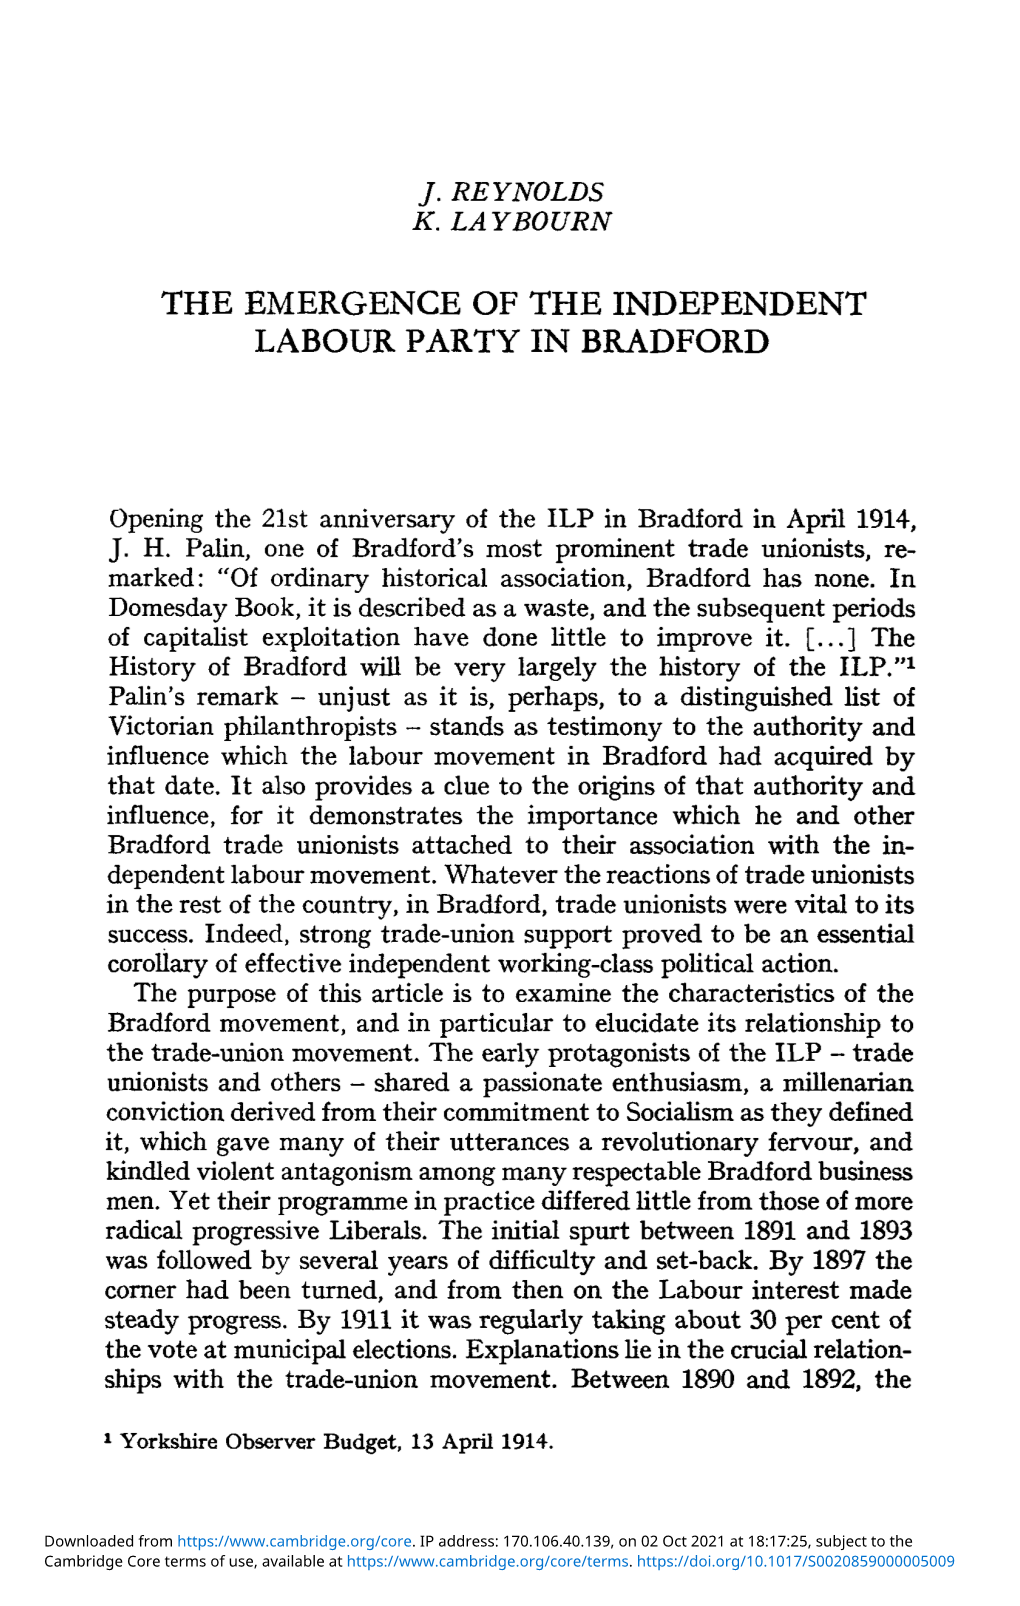 The Emergence of the Independent Labour Party in Bradford